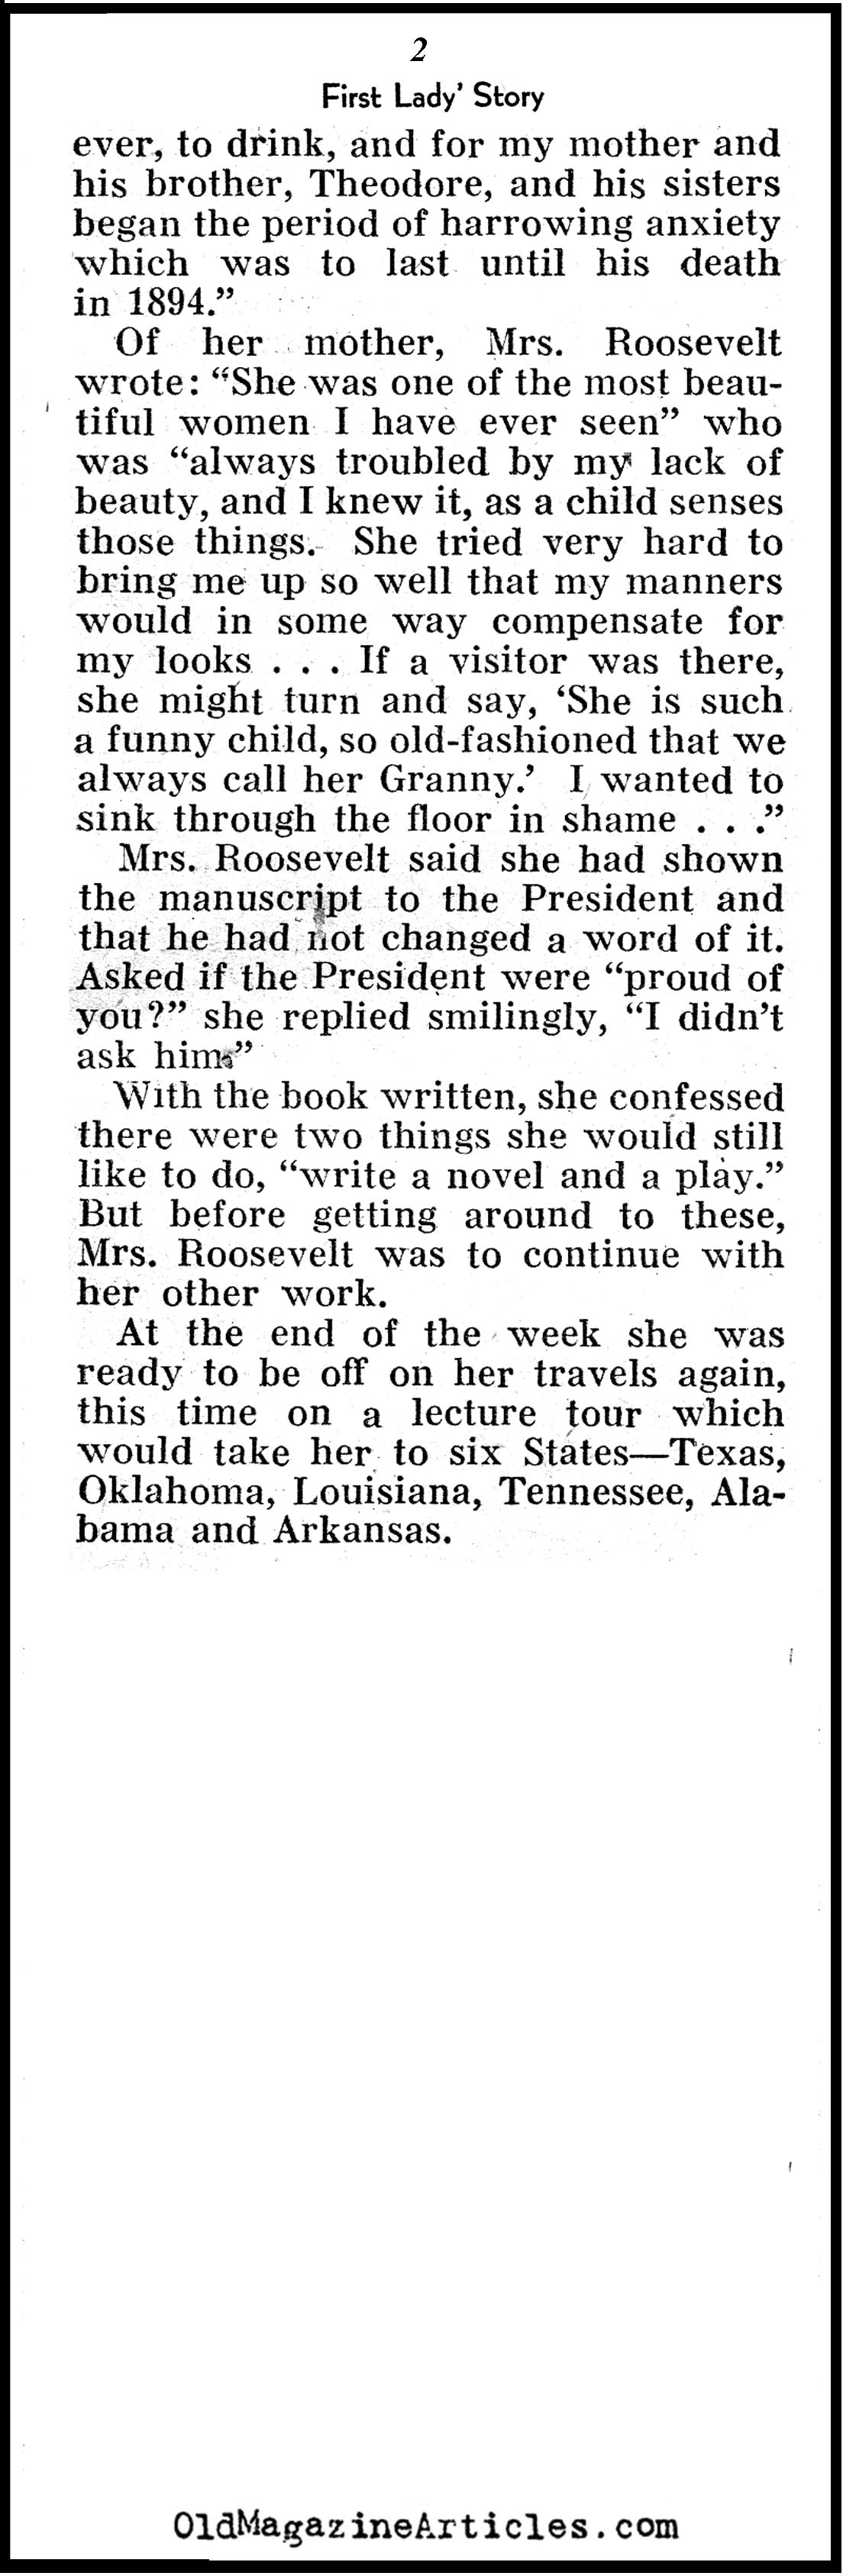 The First Lady's Story (Pathfinder Magazine, 1937)